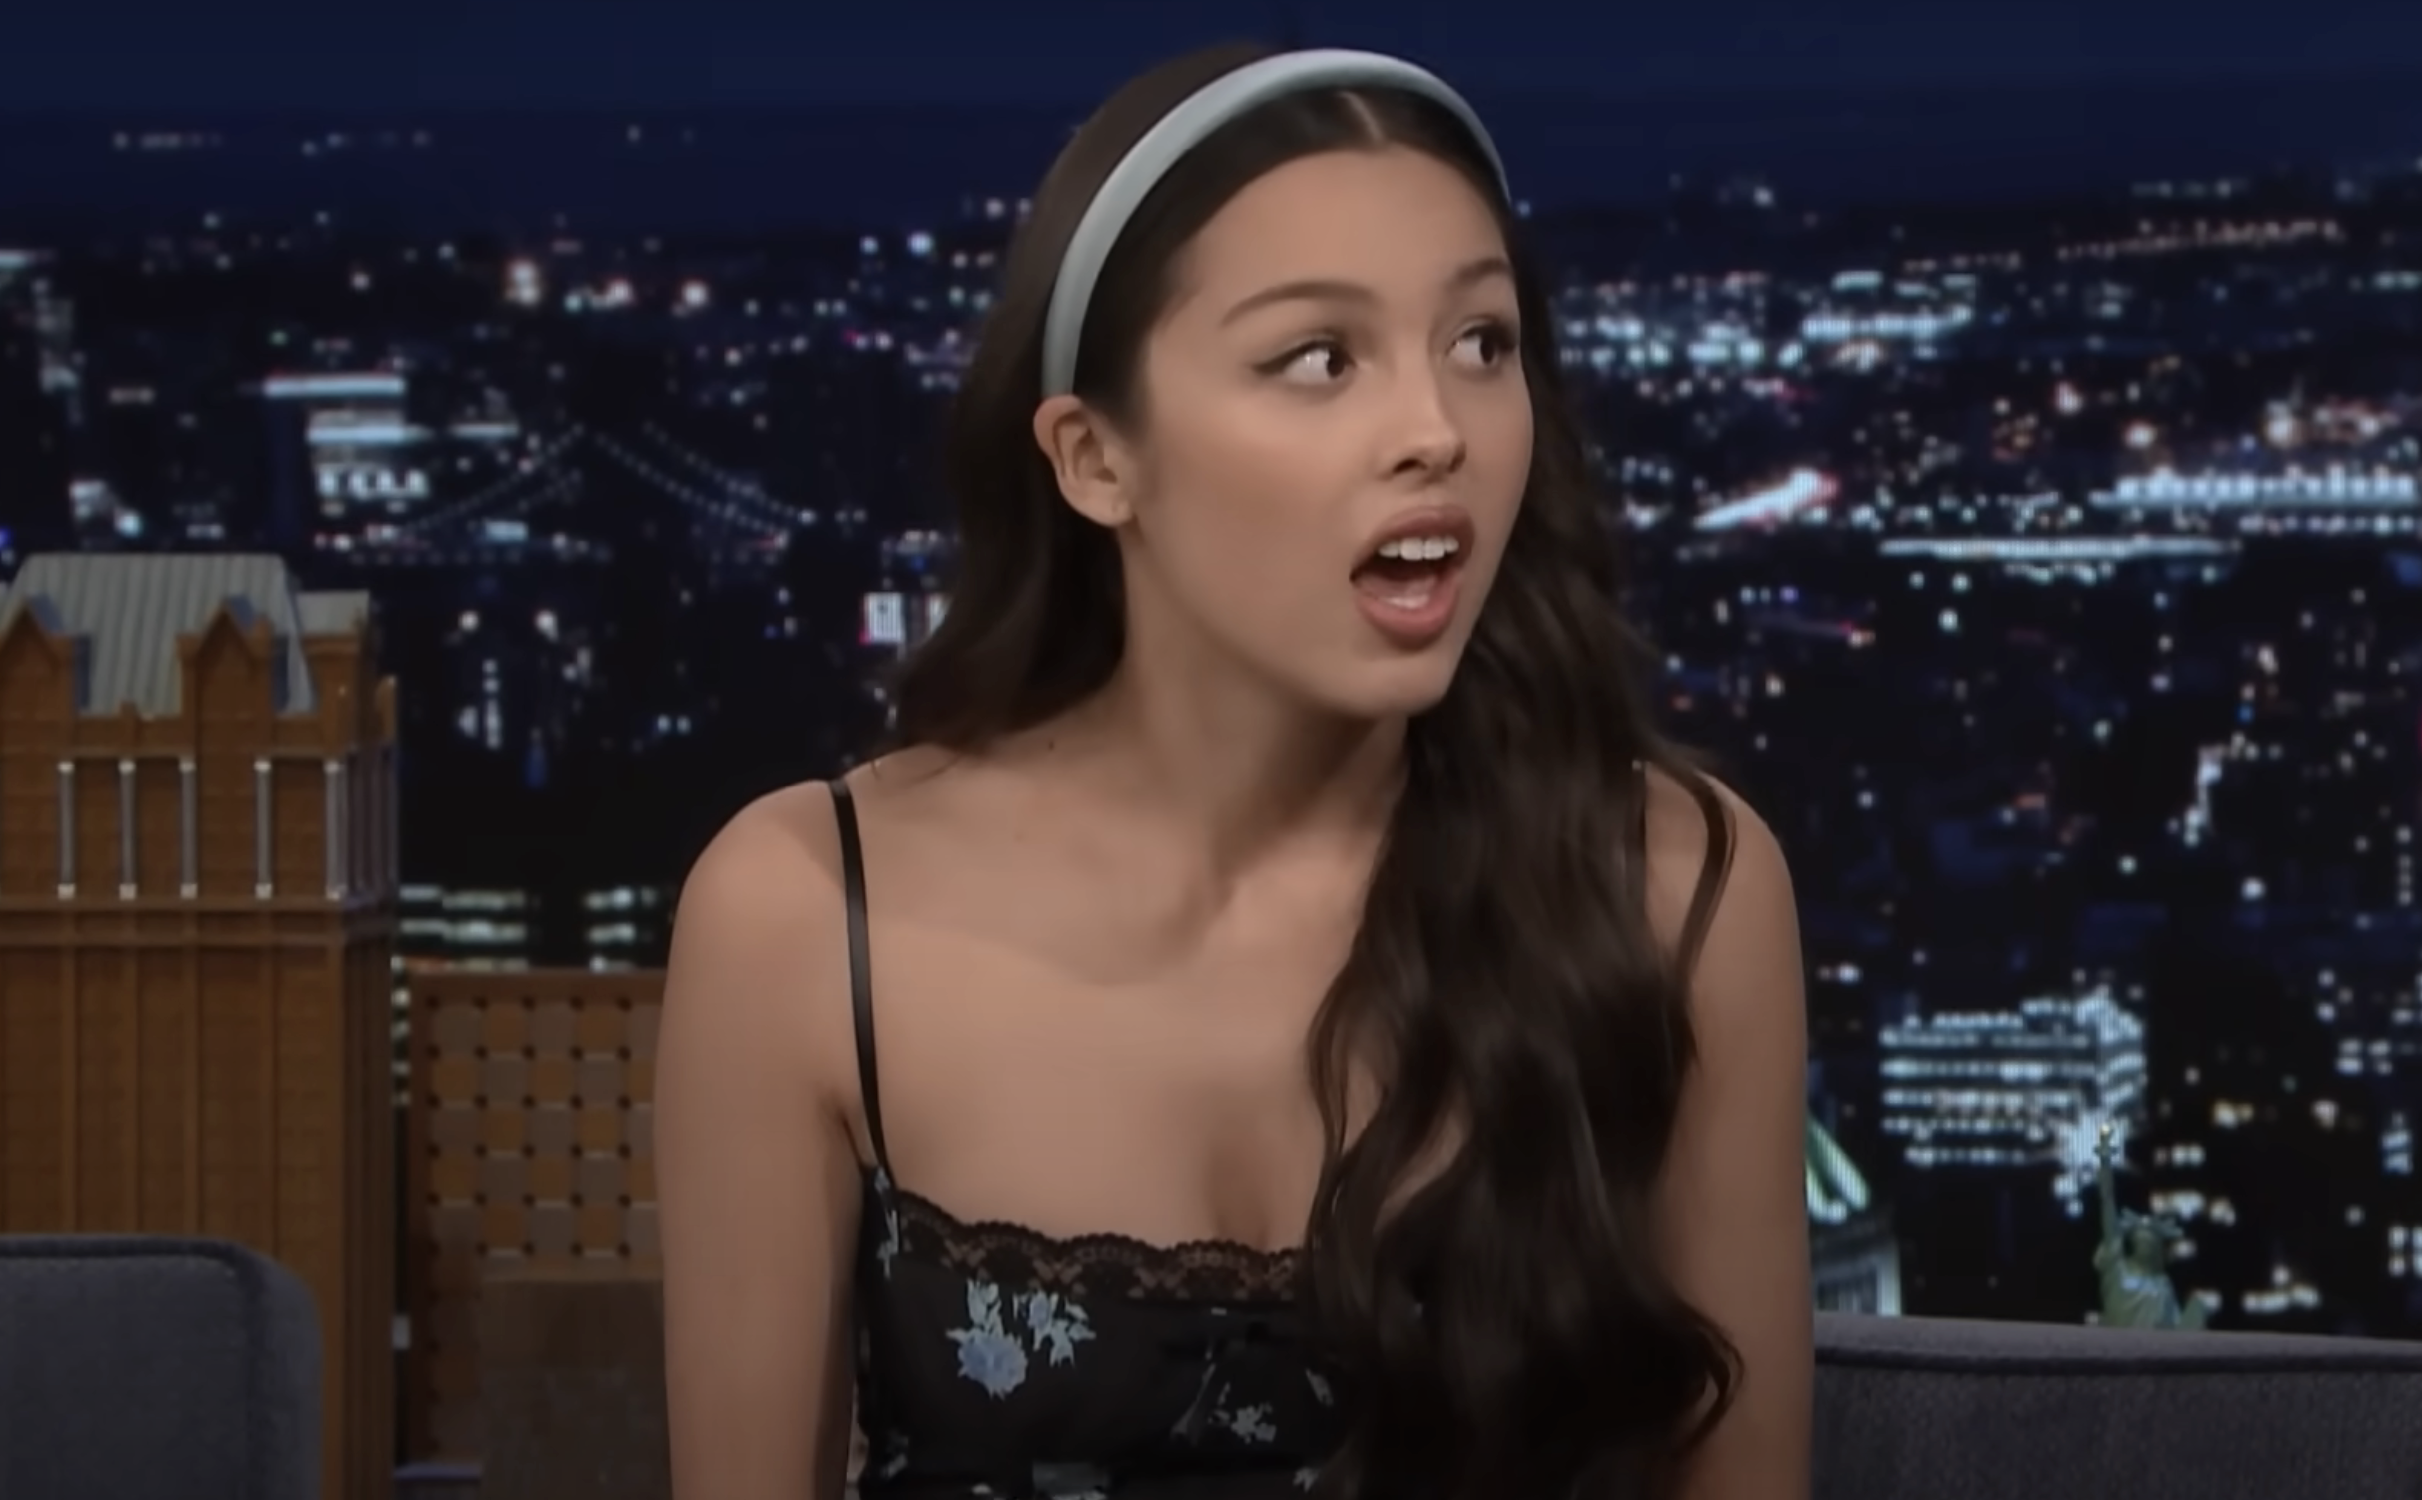 Olivia wearing a headband and a lace-trimmed top sits on a talk show set, looking surprised mid-conversation